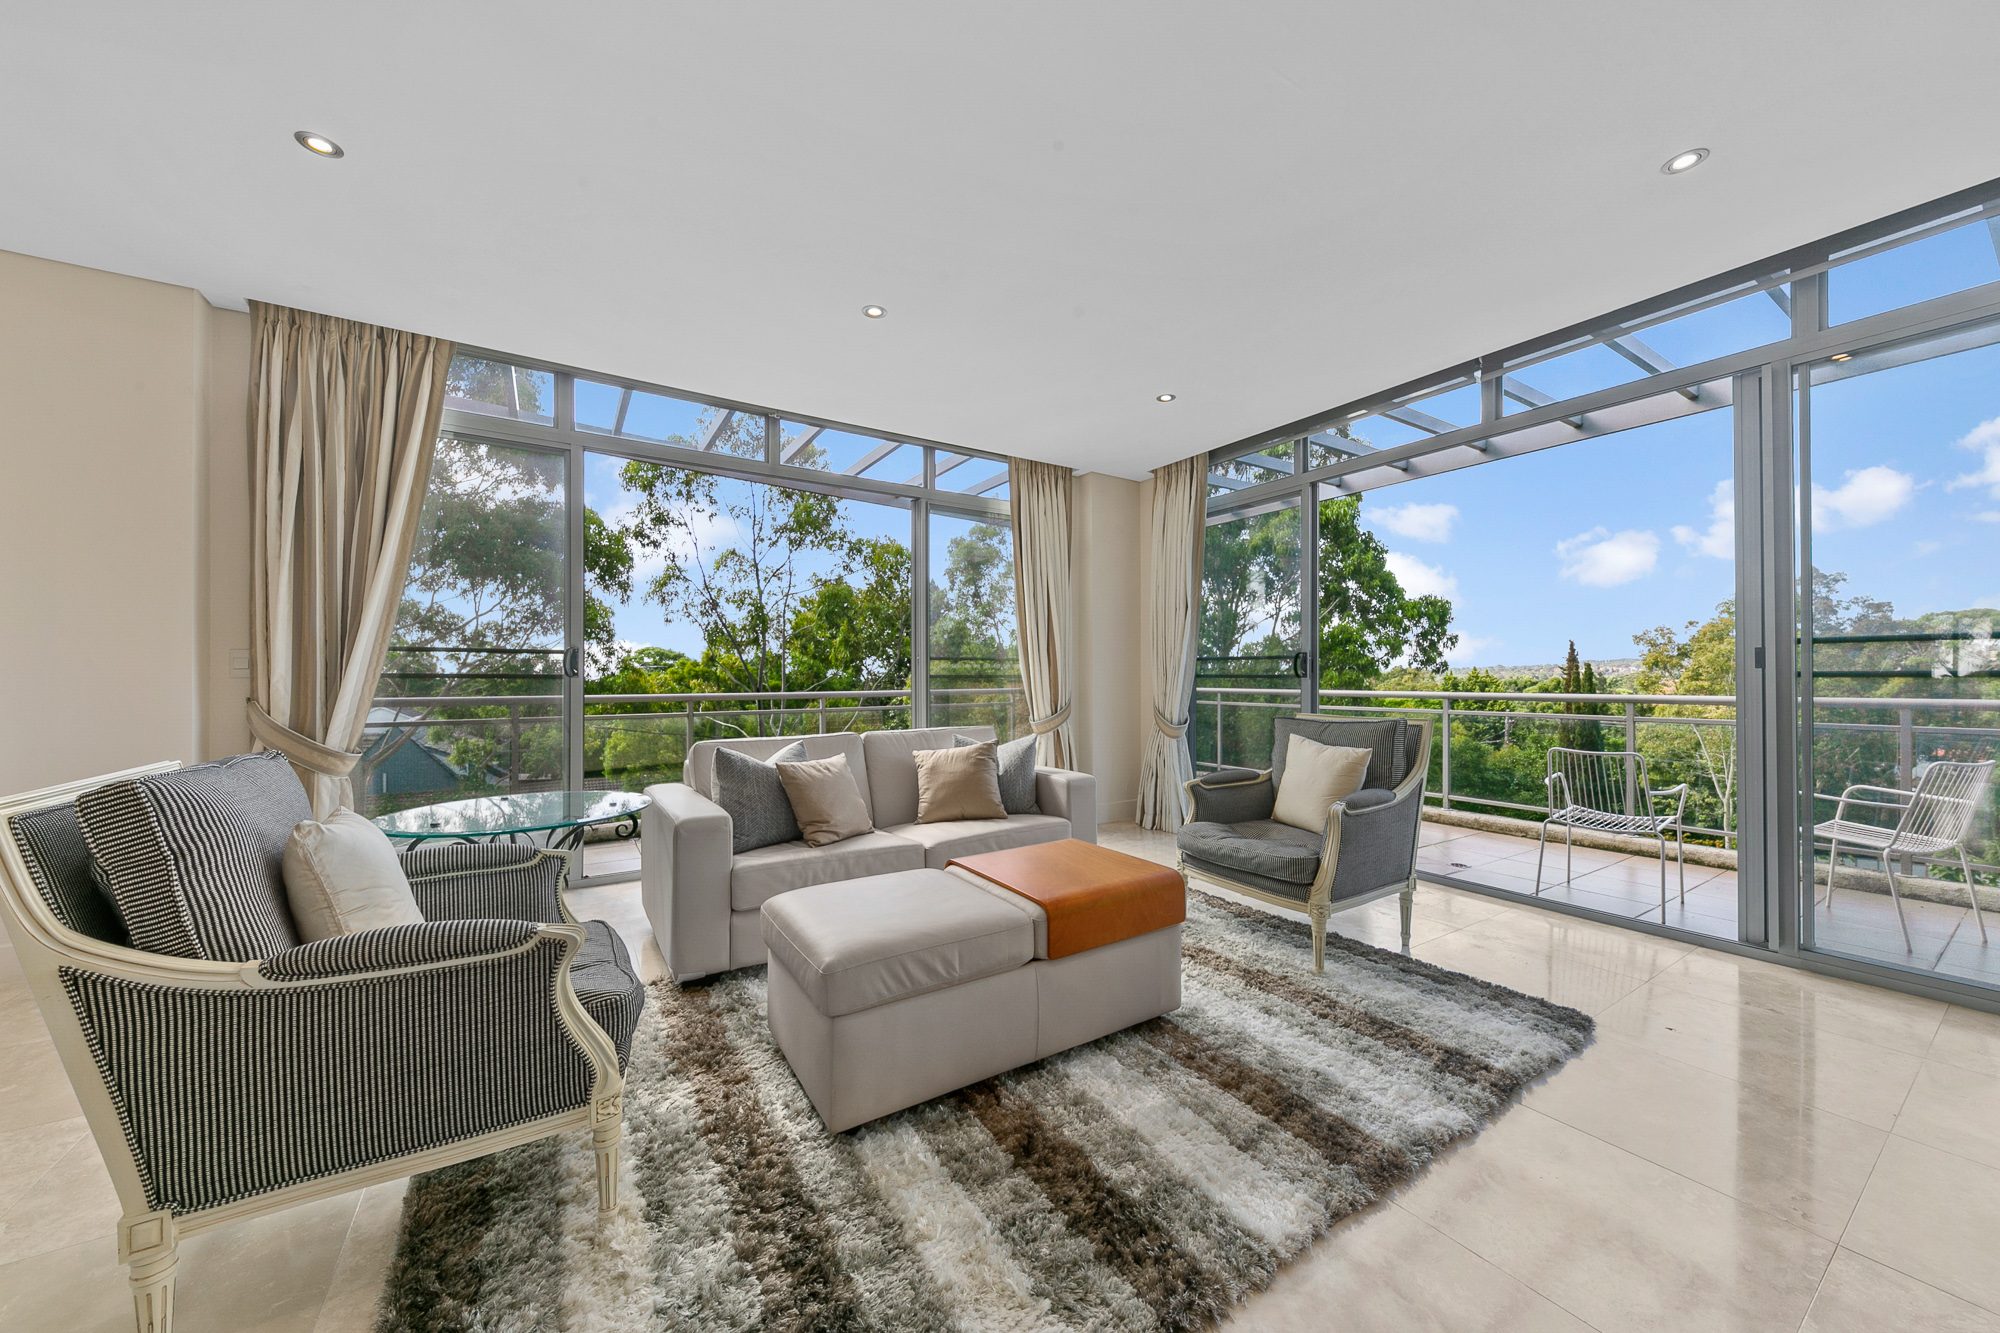 3 Bedrooms, Apartment, For Sale, Sherwin Avenue , 2 Bathrooms, Listing ID 1515, Castle Hill, NSW, Australia, 2154,